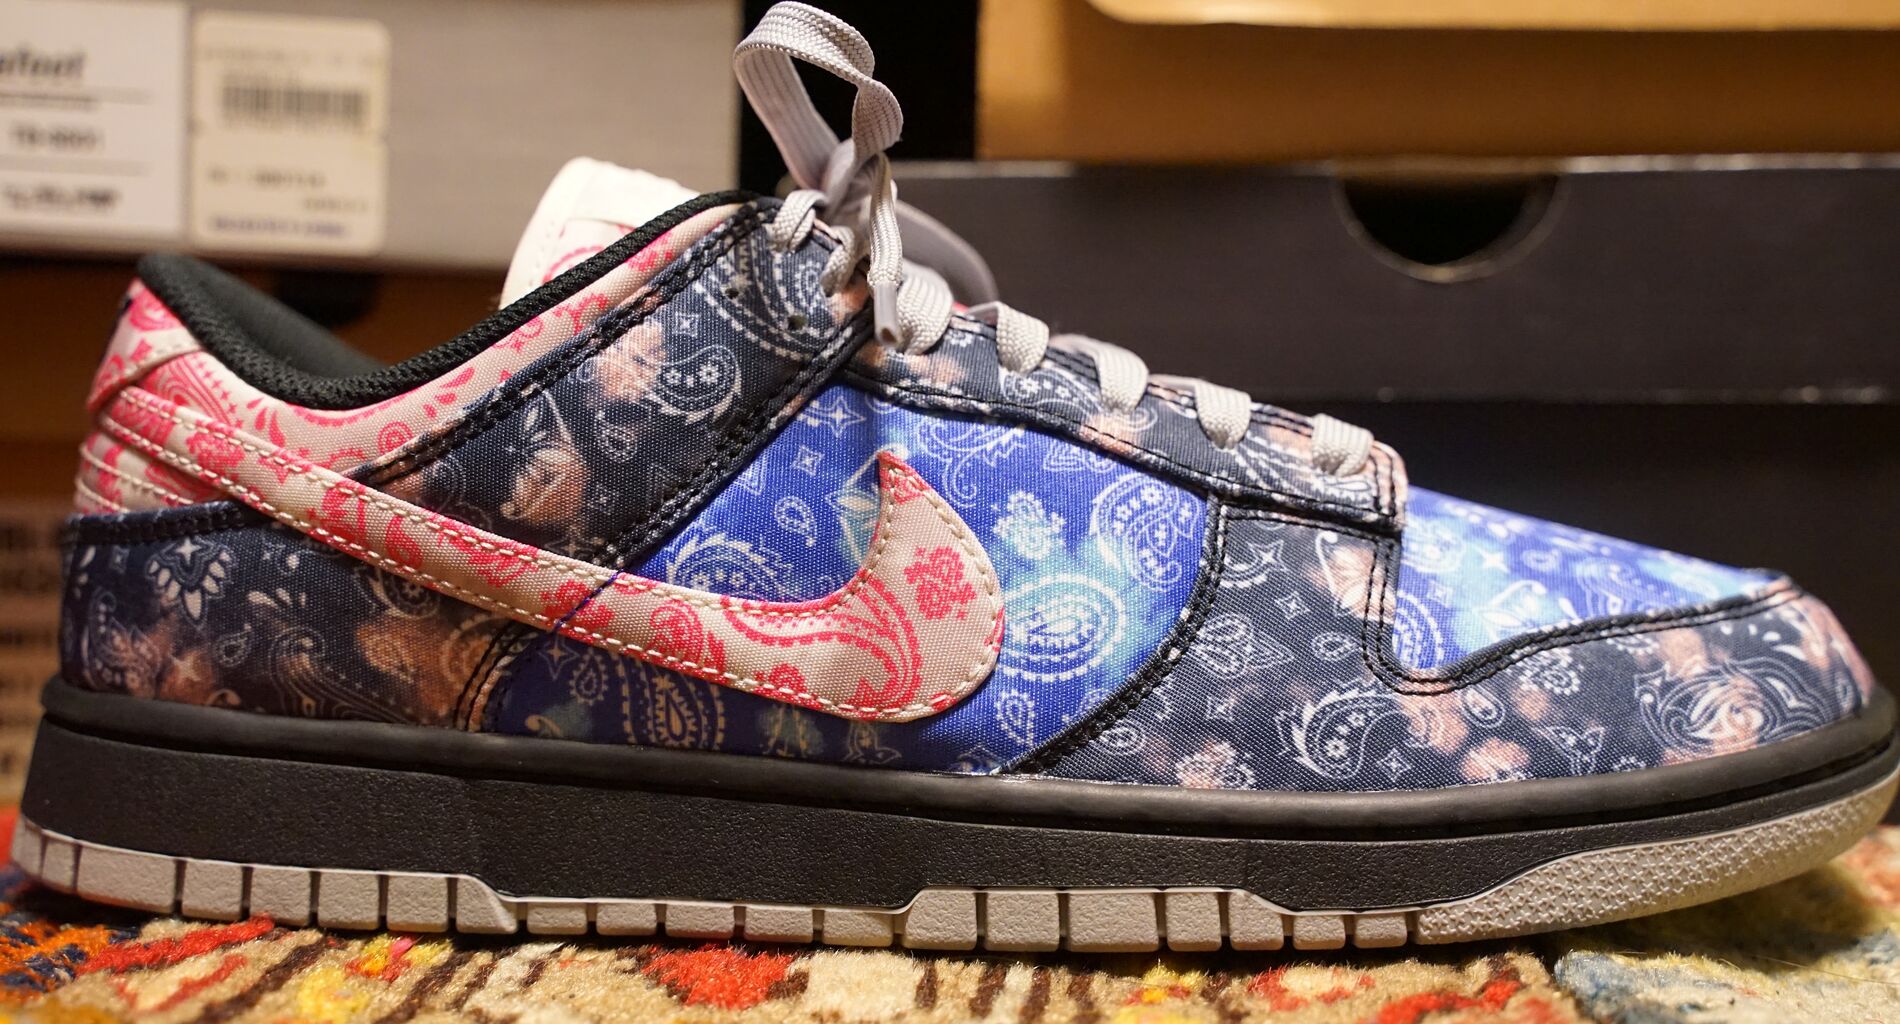 NIKE　DUNK low ペイズリー　unlocked  by you